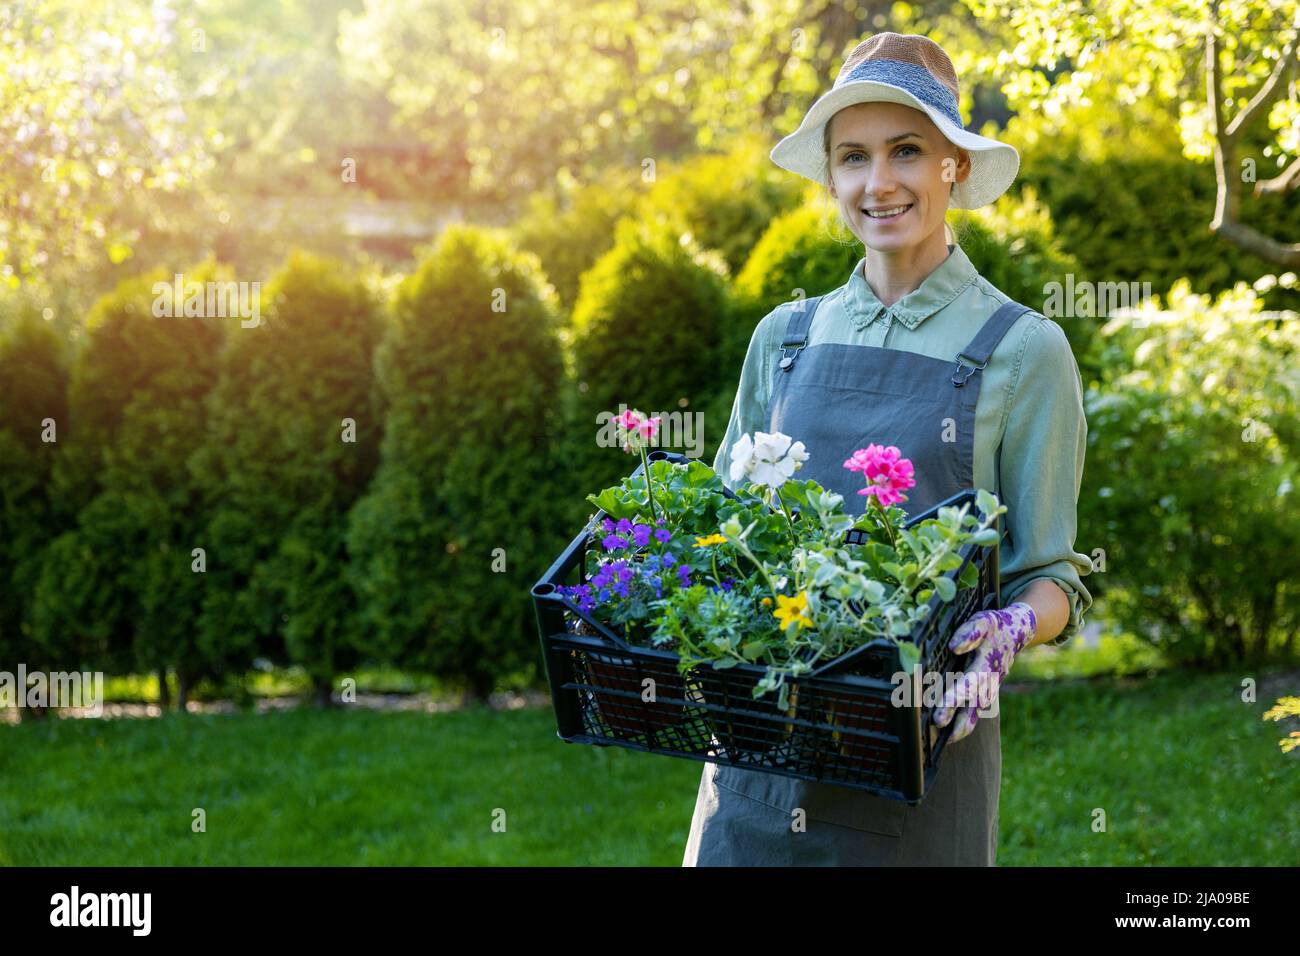 smiling female gardener holding crate with colorful ornamental flowers. gardening services. copy space Stock Photo